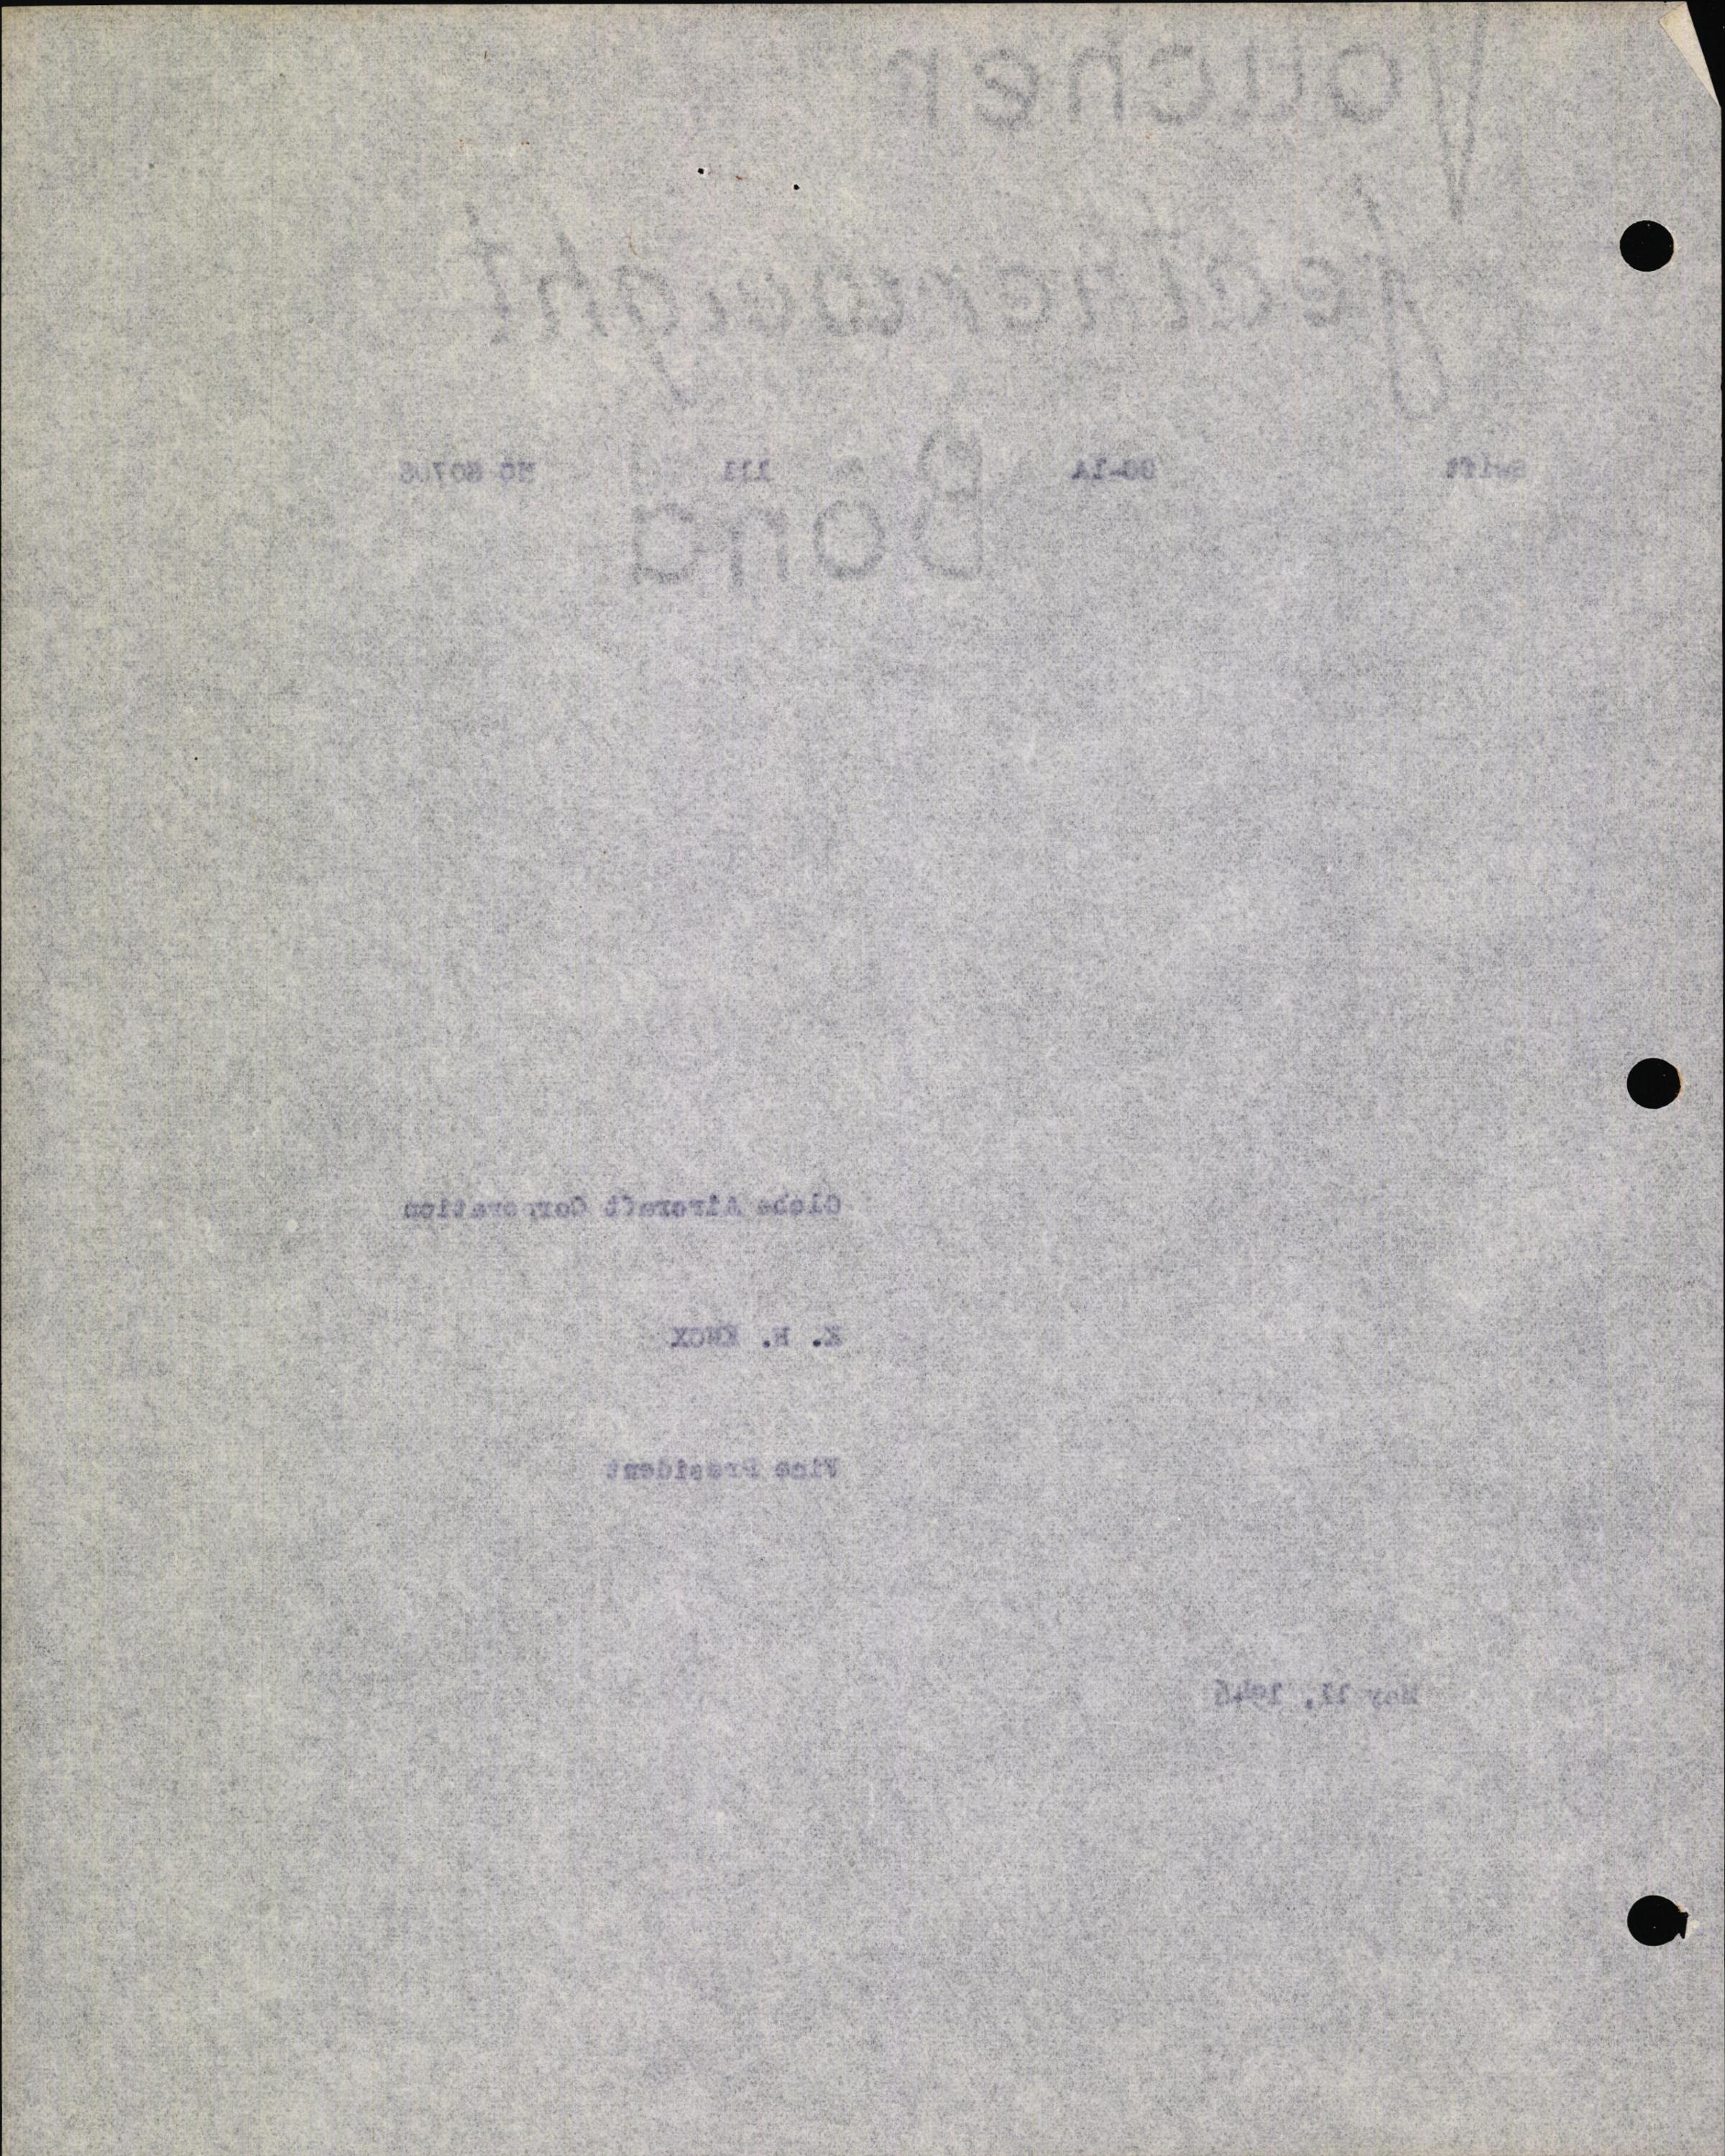 Sample page 10 from AirCorps Library document: Technical Information for Serial Number 111